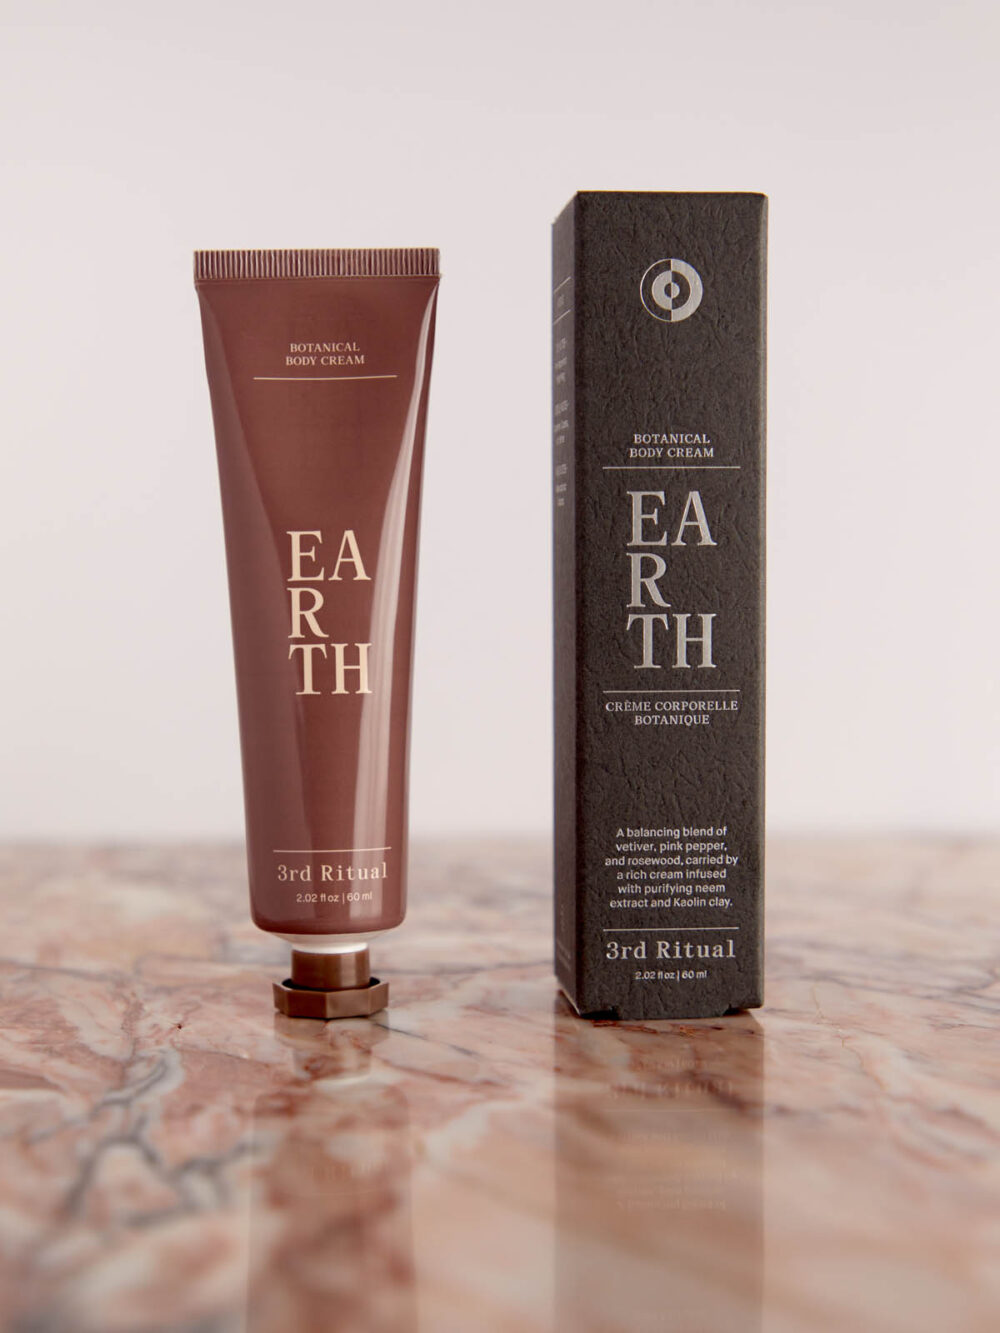 Earth Botanical Body Cream and box on pink marble